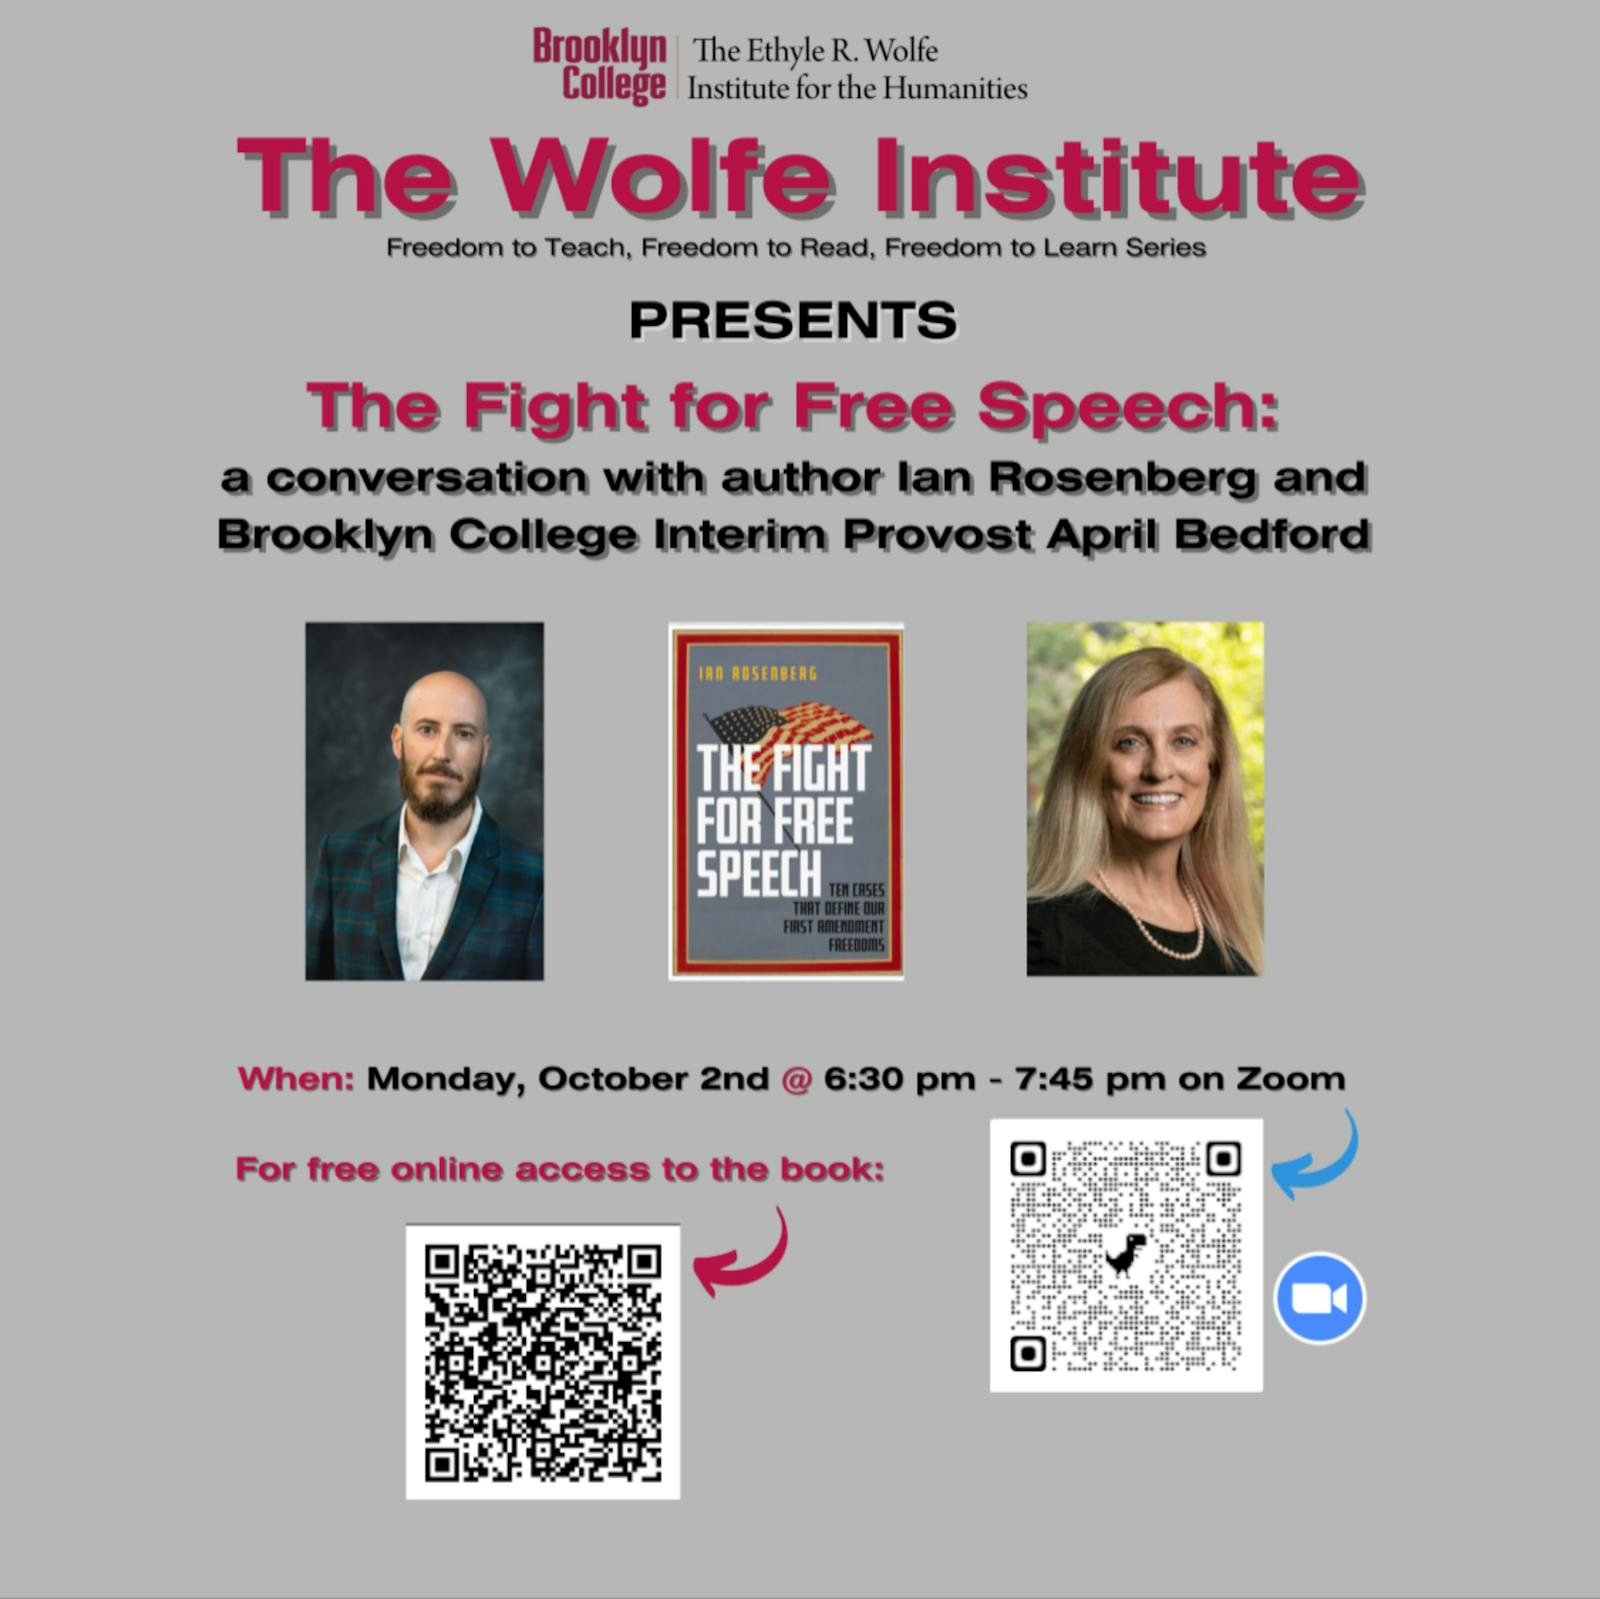 Brooklyn College Presents A Virtual Talk on THE FIGHT FOR FREE SPEECH